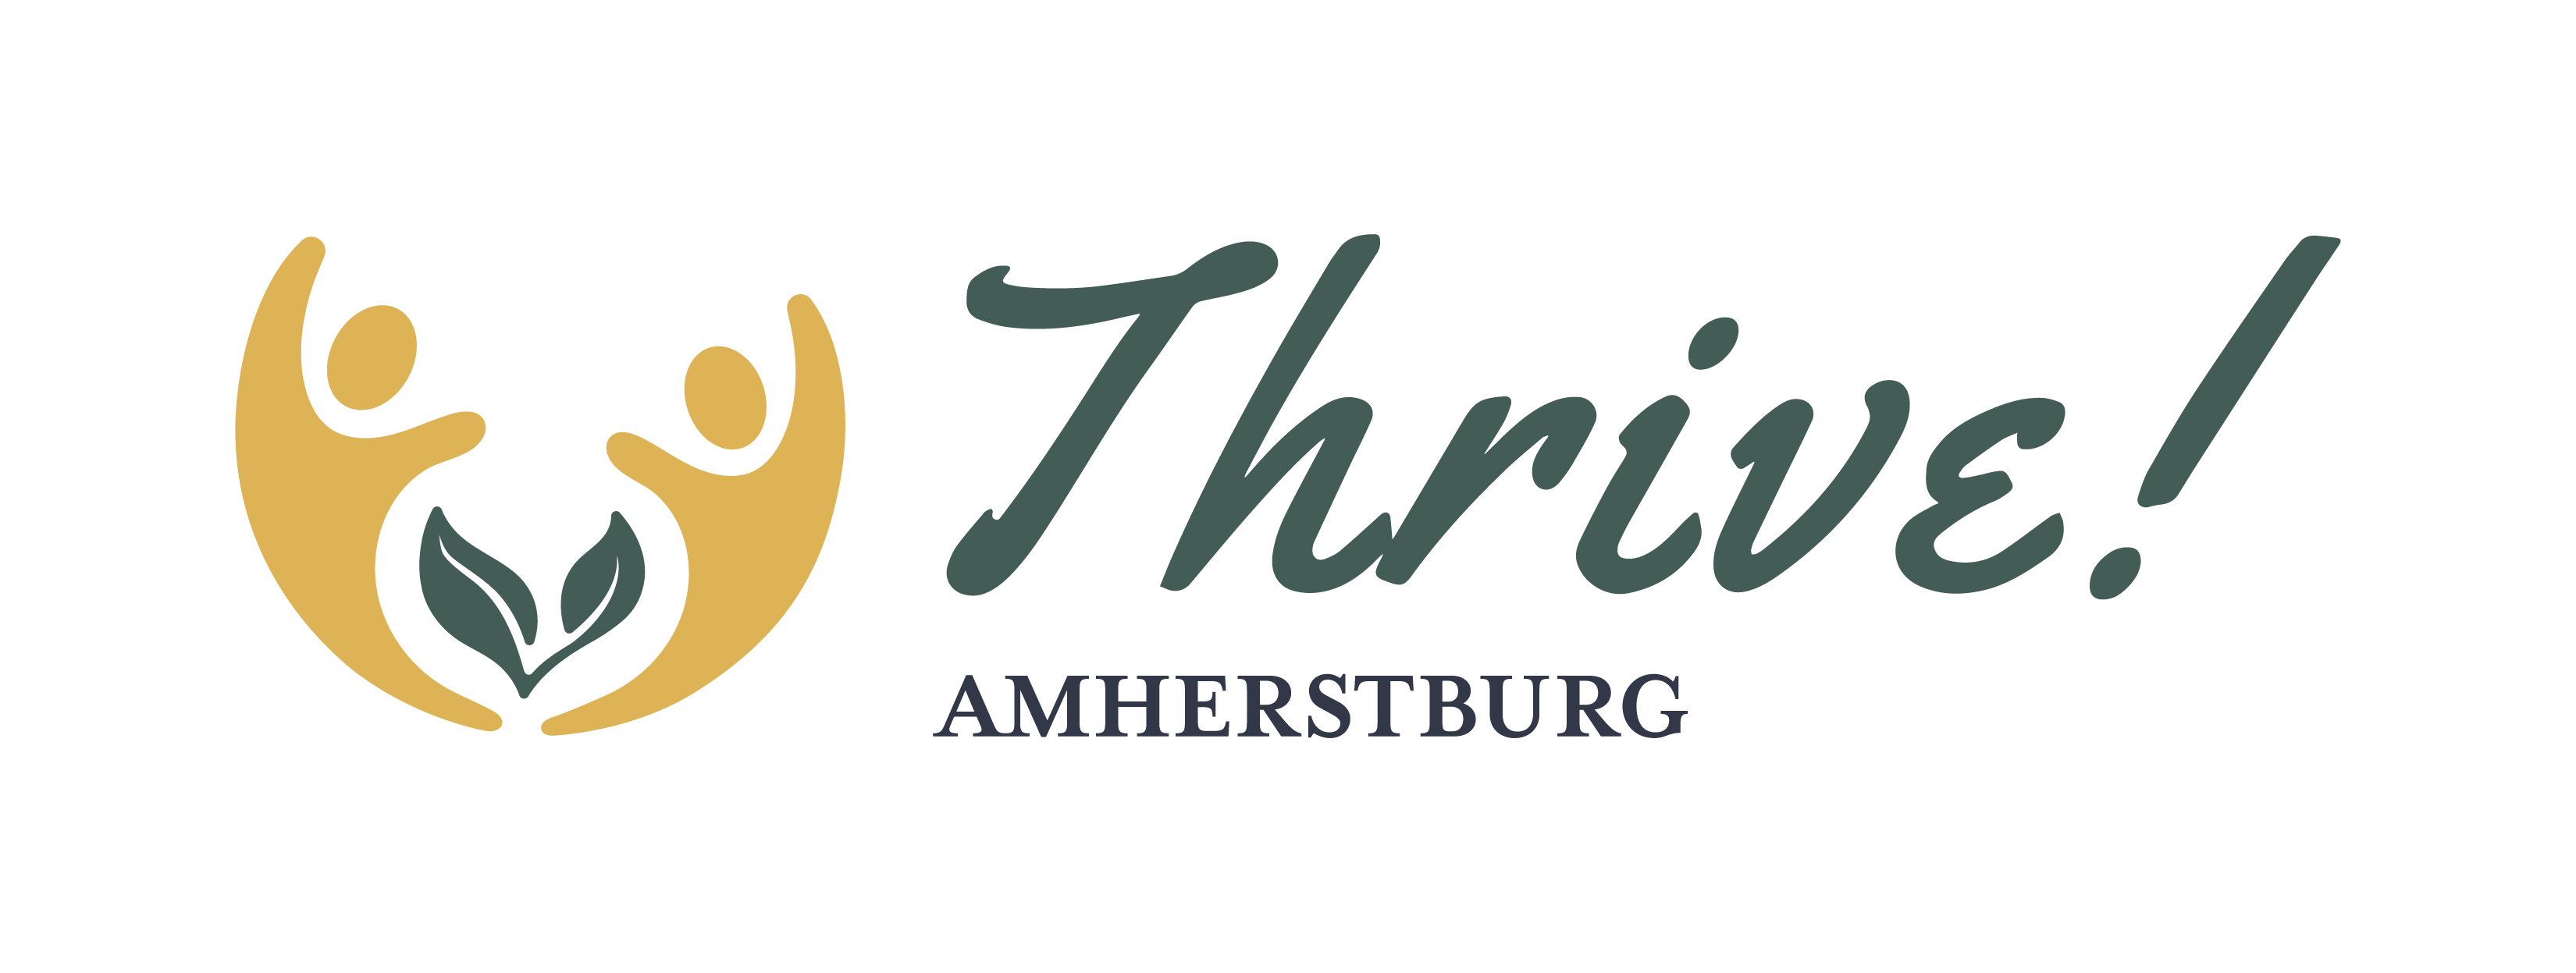 We really want Amherstburg to THRIVE.